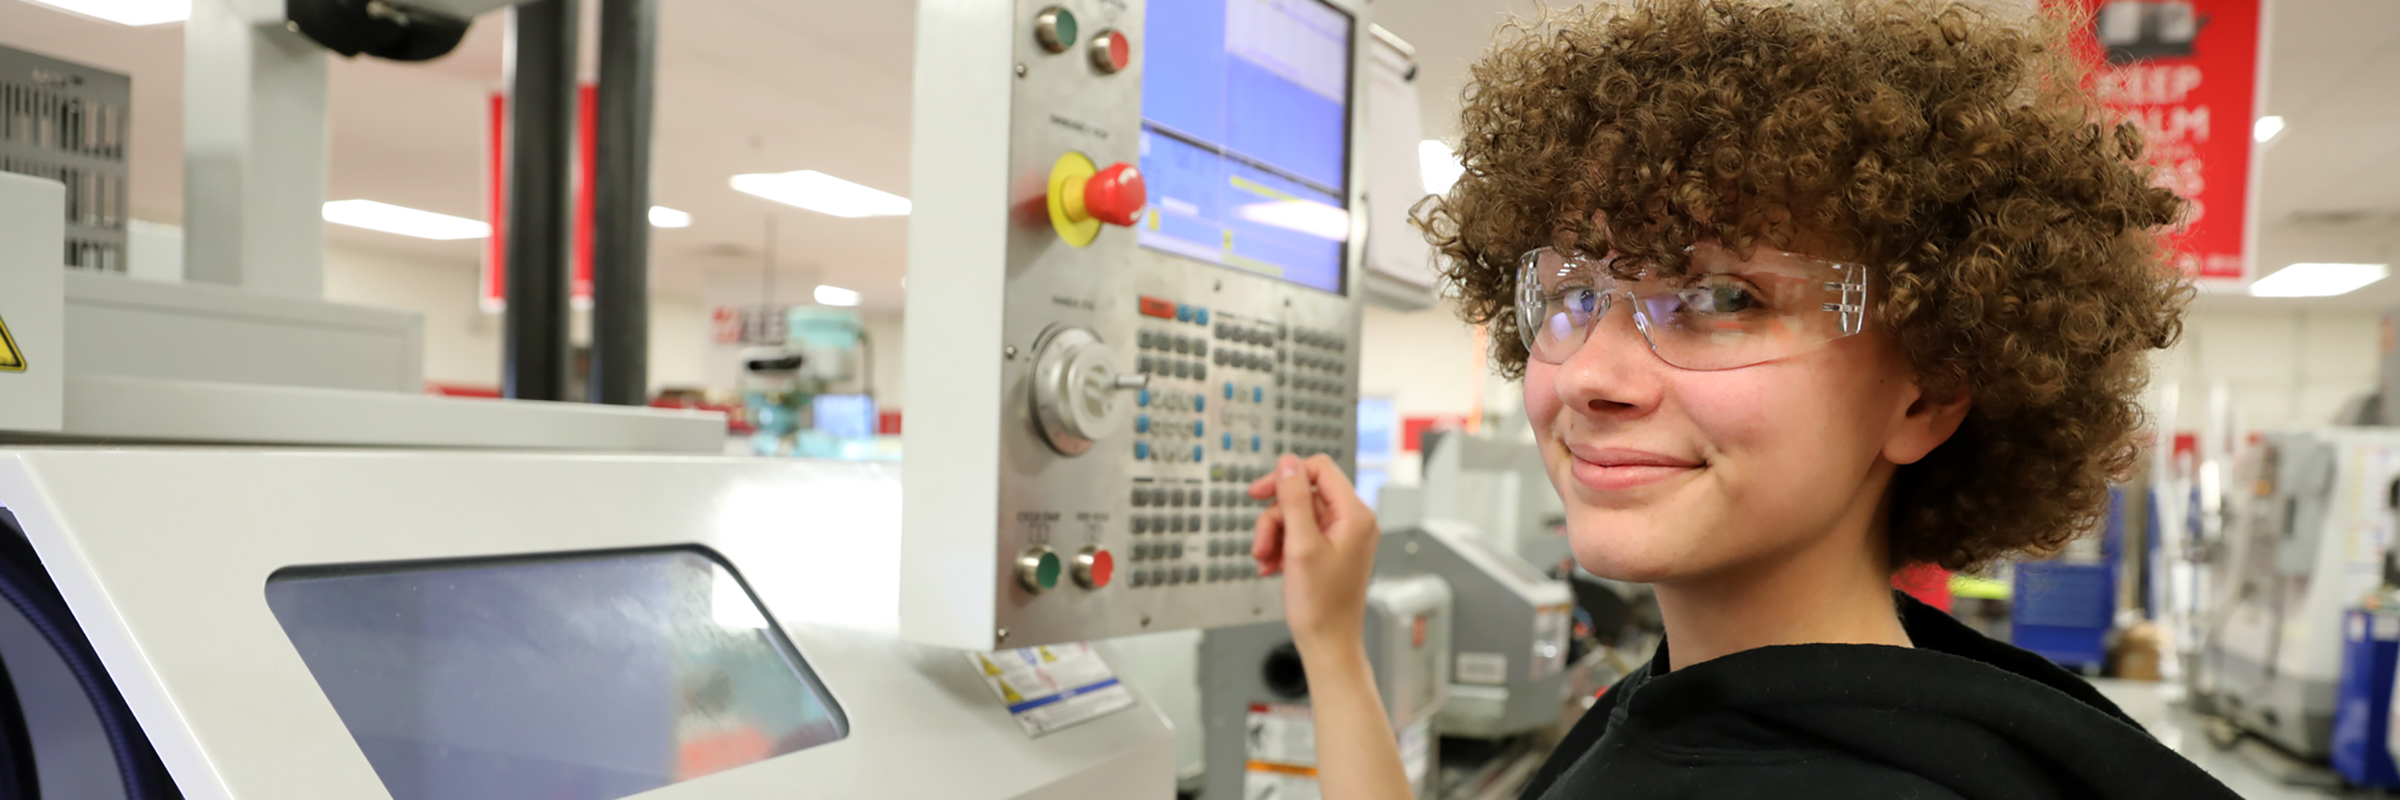 young person smiling at camera with safety goggles in a room full of machines